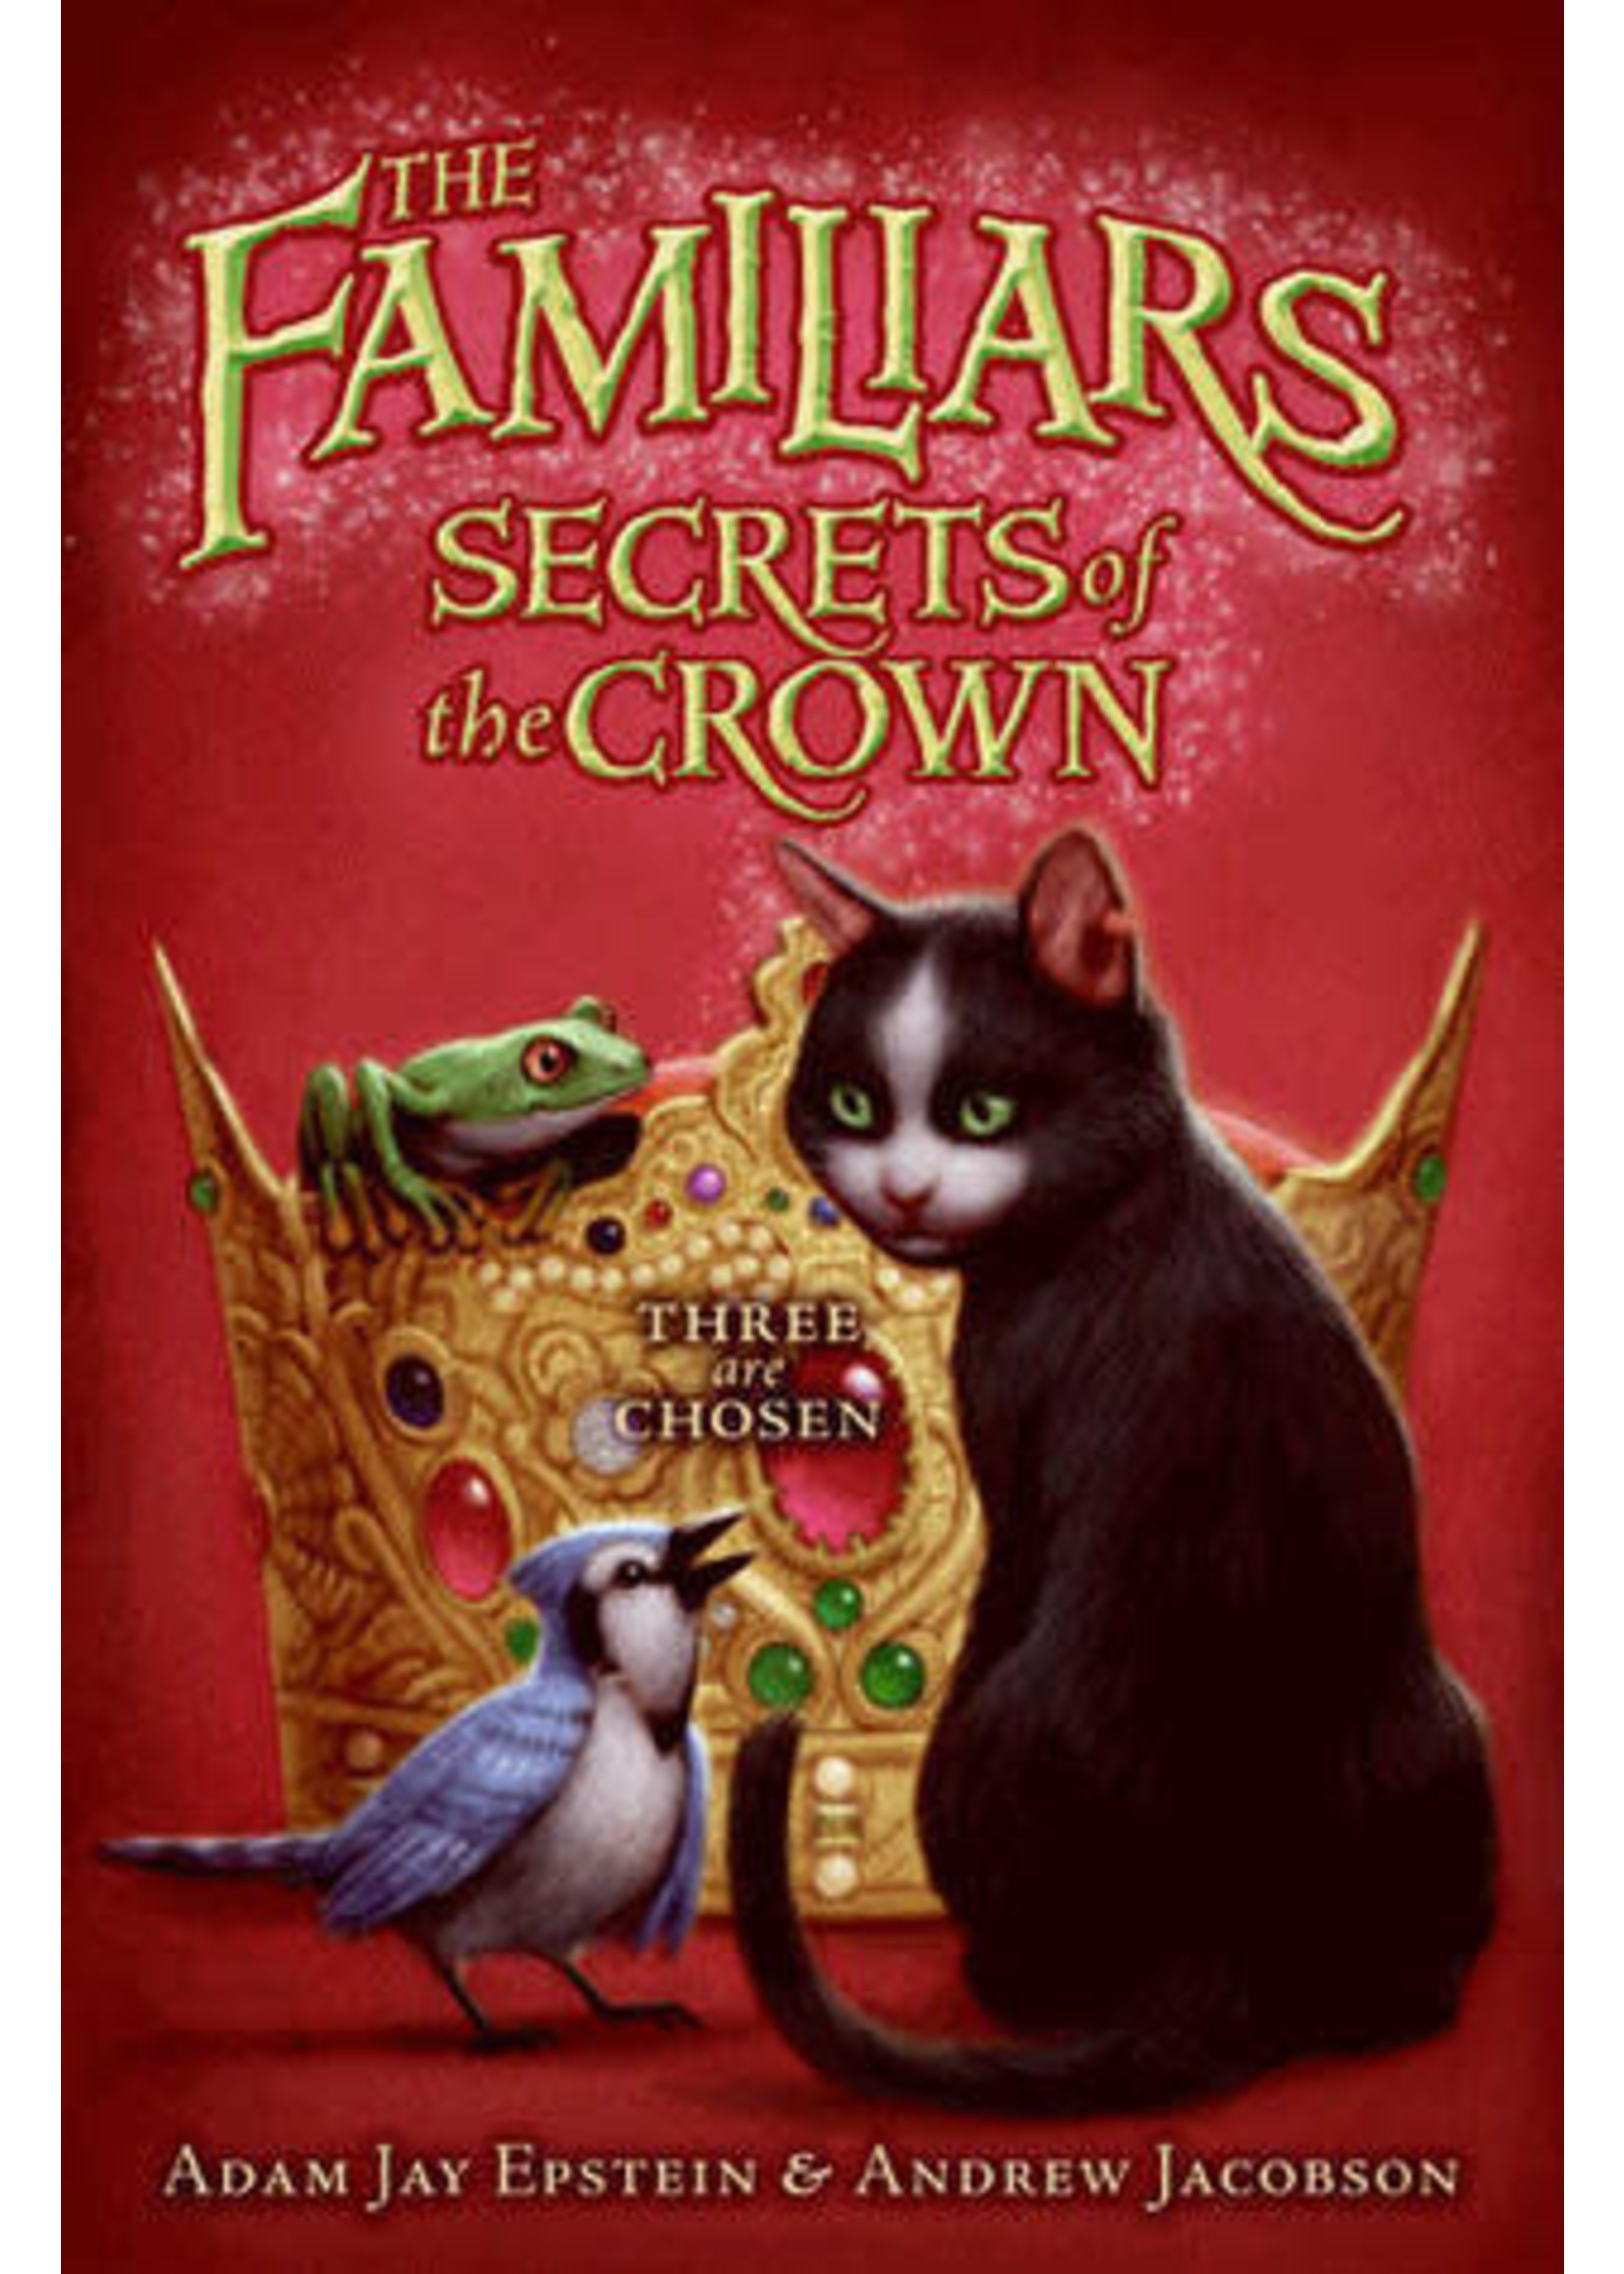 Secrets of the Crown (The Familiars #2) by Adam Jay Epstein and Andrew Jacobson